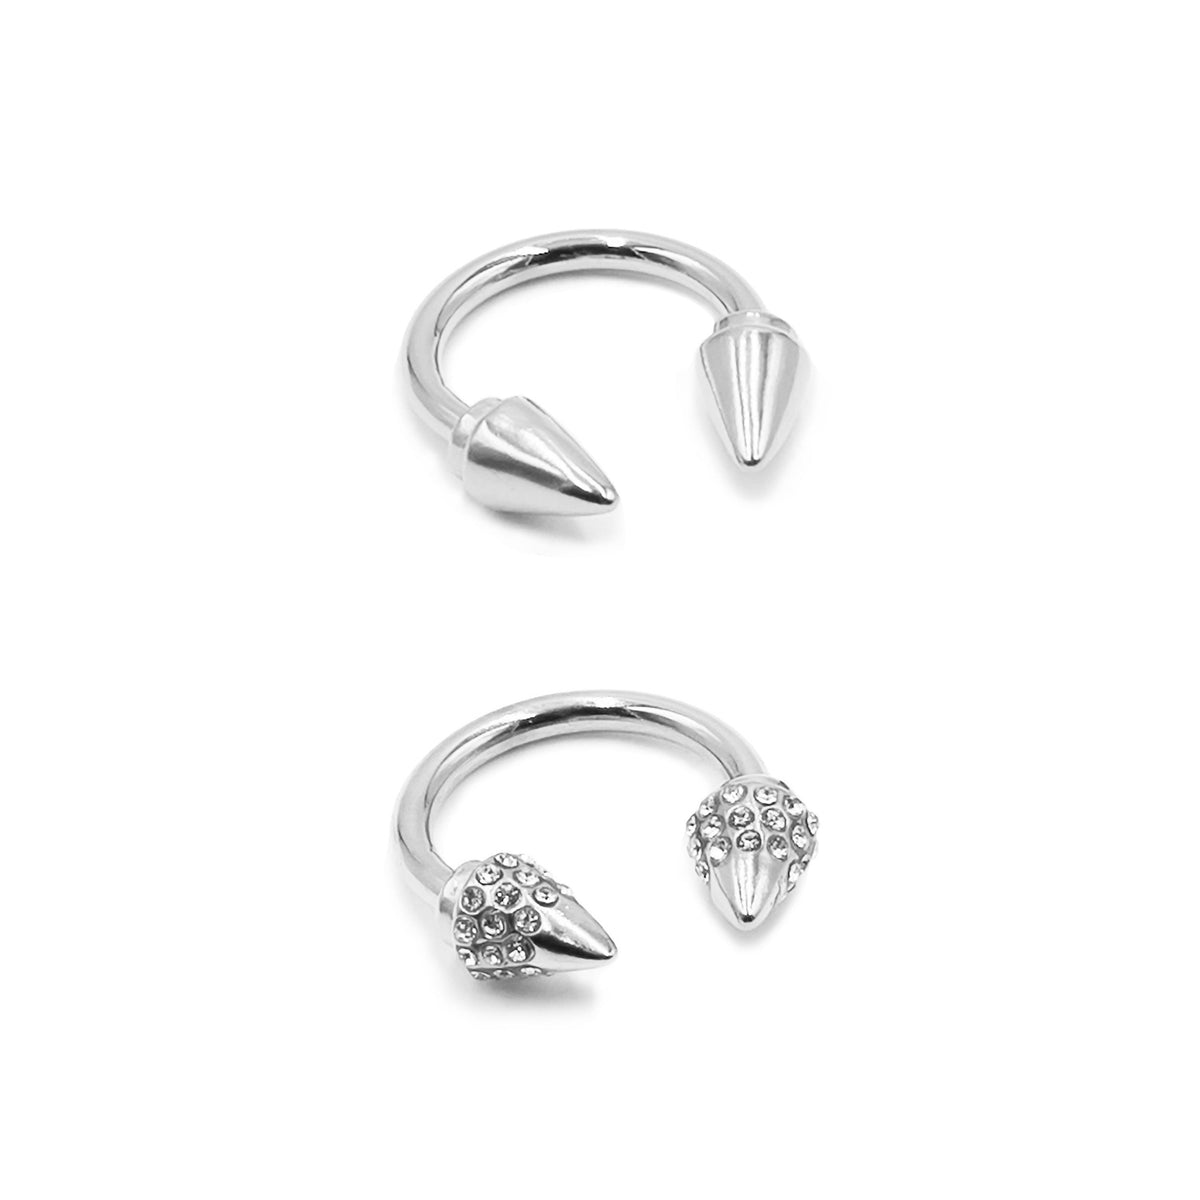 Spike Collection - Silver Ring Set fine designer jewelry for men and women